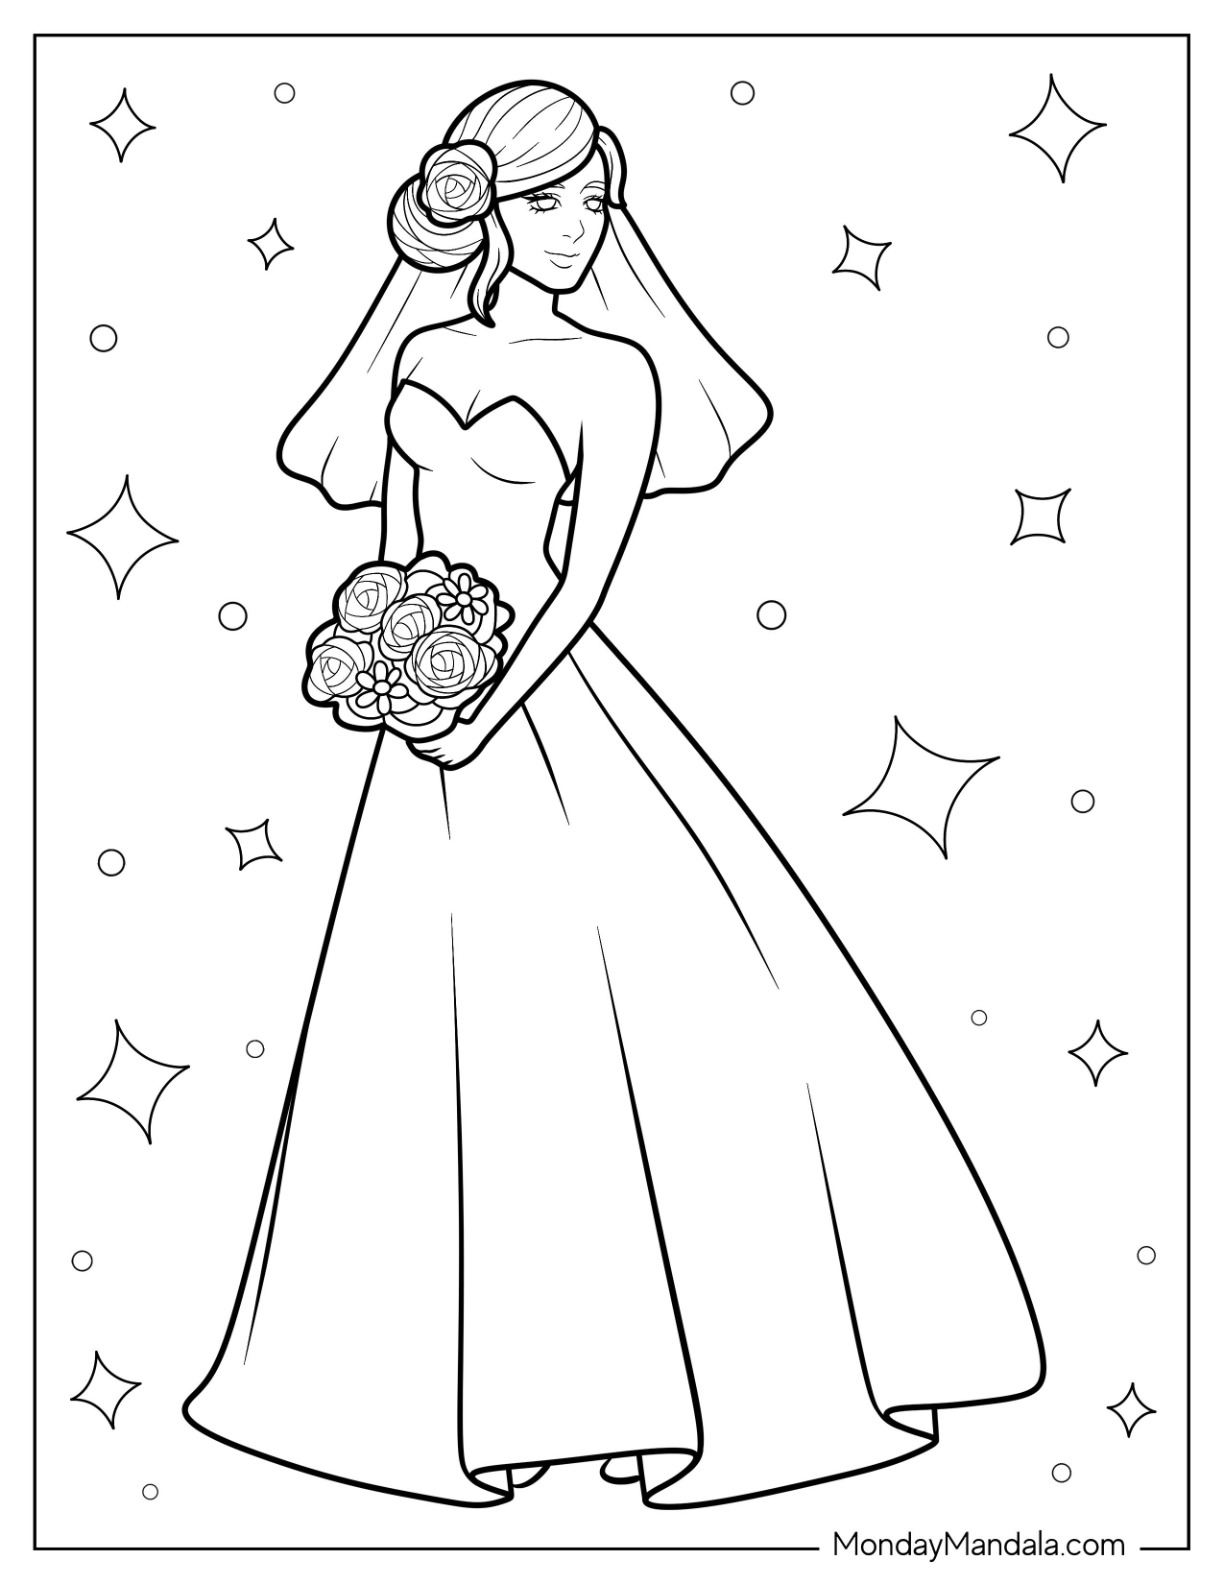 Dress coloring pages free pdf printables